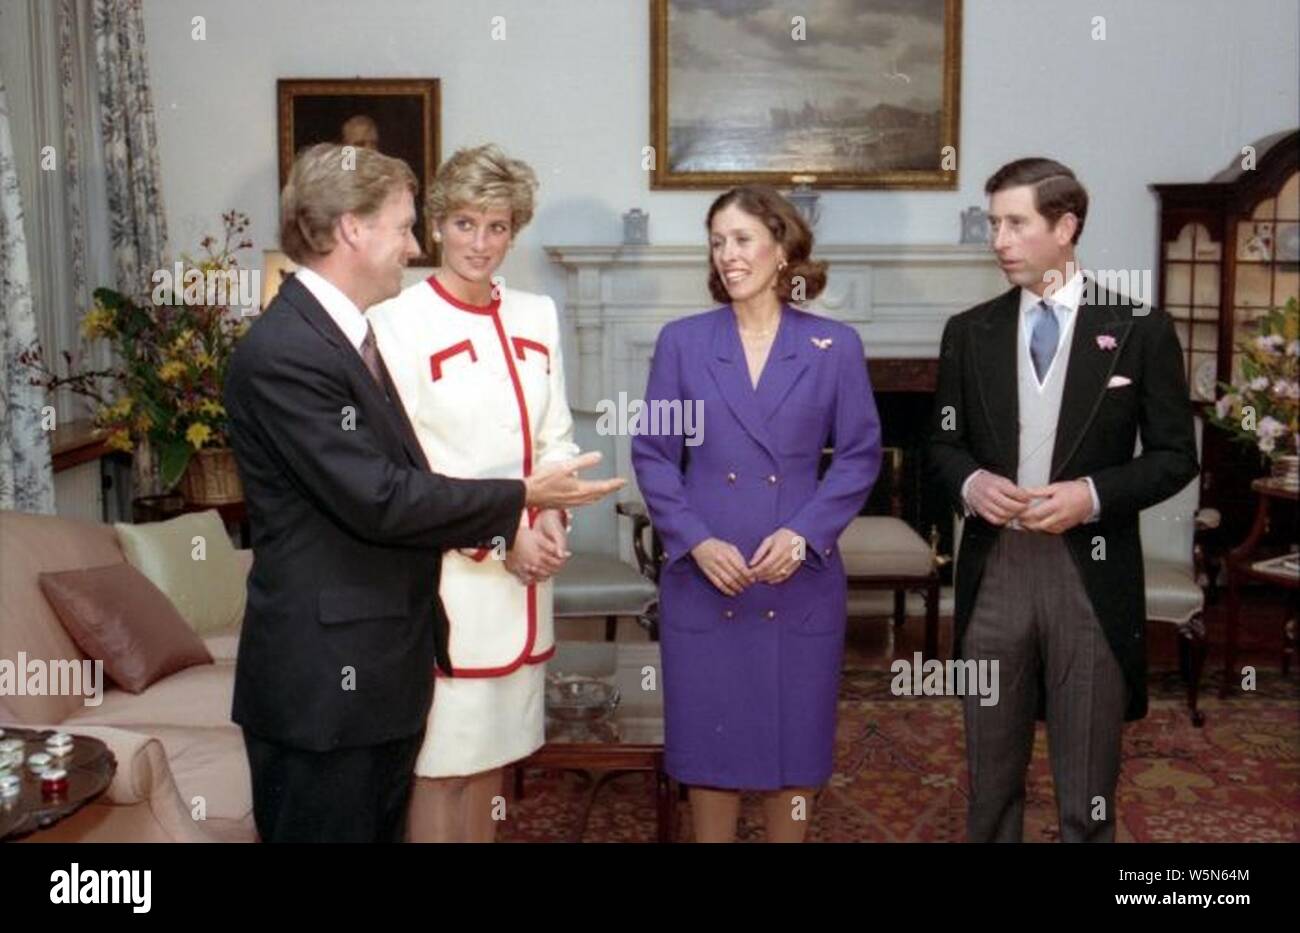 Dan Quayle and Marilyn Quayle with Prince Charles and Princess Diana. Stock Photo